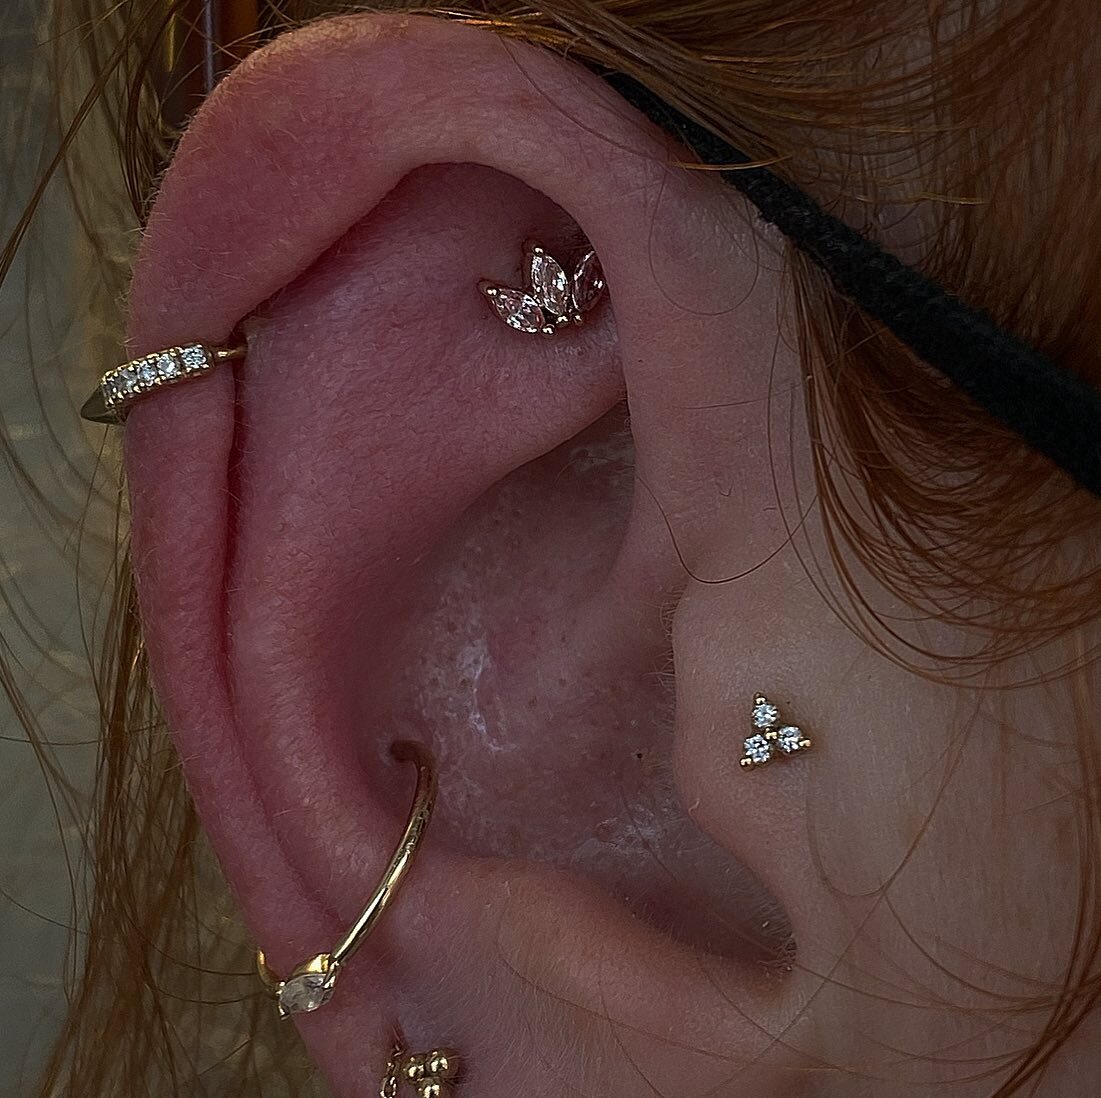 Have you seen this adorable Faux Rook @marie.the.piercer performed using a 14k yellow gold Moet from @buddhajewelryorganics 🧡

So cute and shiny! Perfect to compliment this beauty&rsquo;s existing piercings and stunning collection ! 

Book your appo